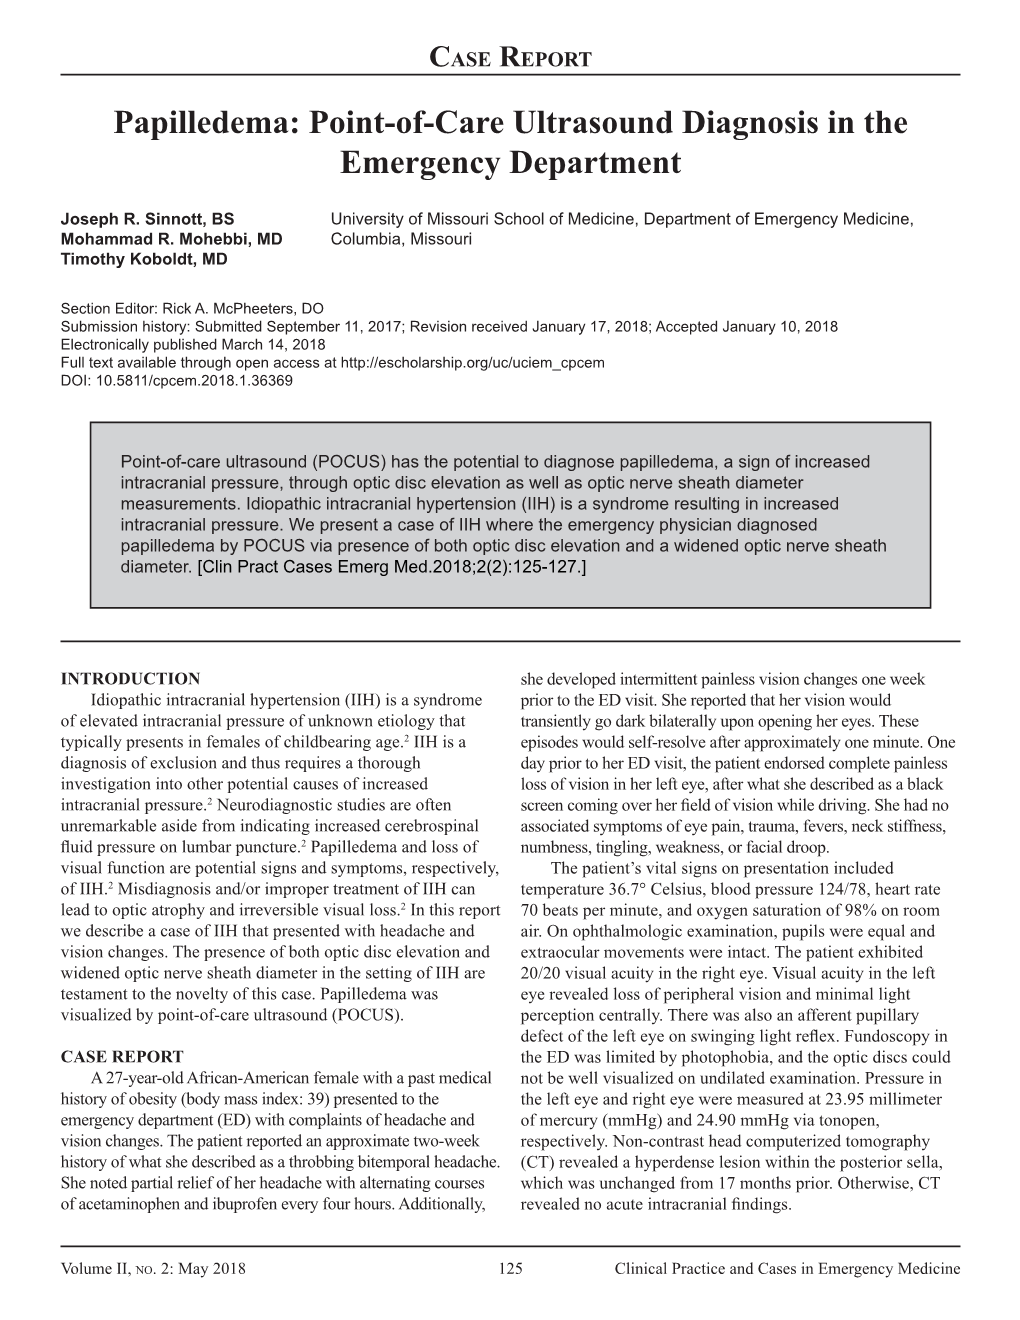 Papilledema: Point-Of-Care Ultrasound Diagnosis in the Emergency Department